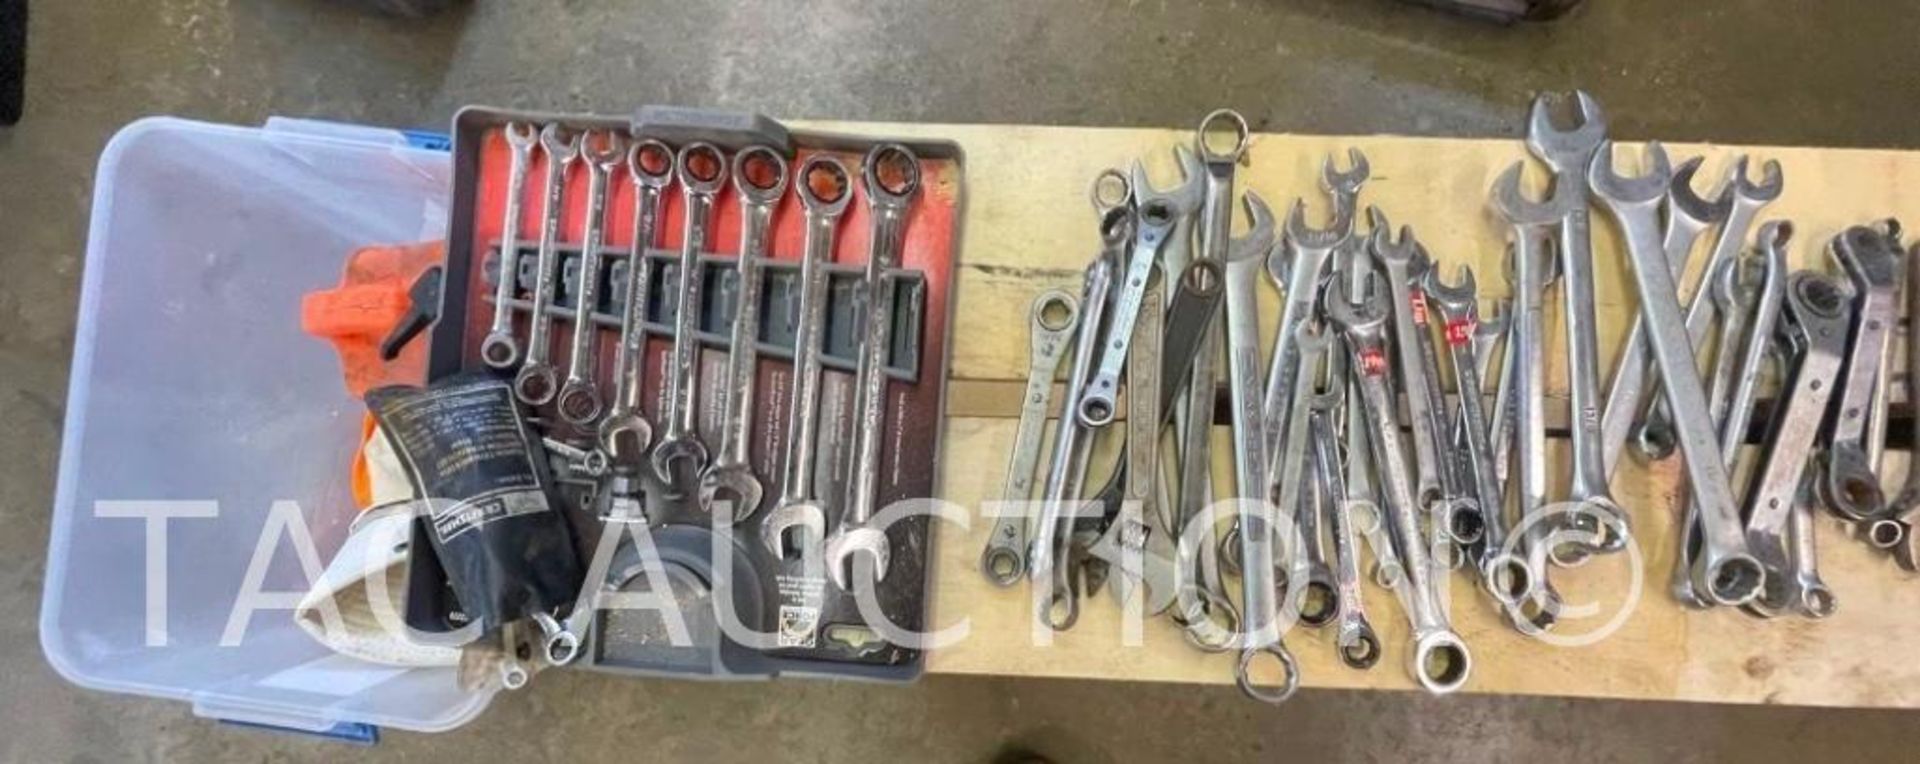 Assorted Wrenches - Image 3 of 5